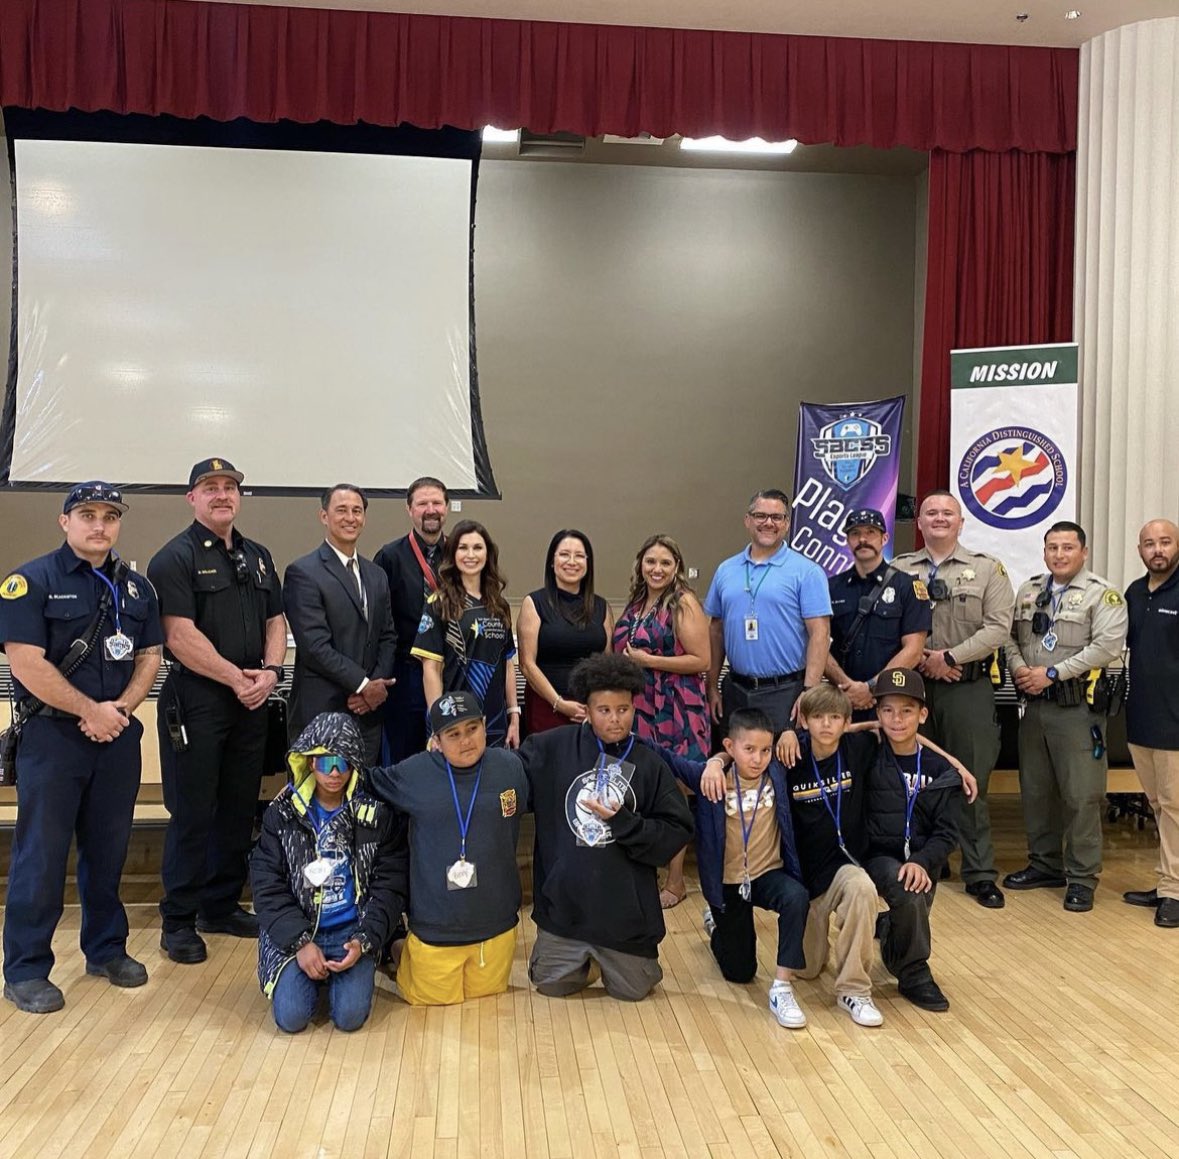 We hosted our first @EsportsSbcss elementary competition in @RedlandsUSD between our Mission Elementary Leadership Academy and their mentors @LomalindaFire and @sbcountysheriff . #missionmustangs #mustangpride #buildingleaders #mentorsmatter #ThisIsRUSD